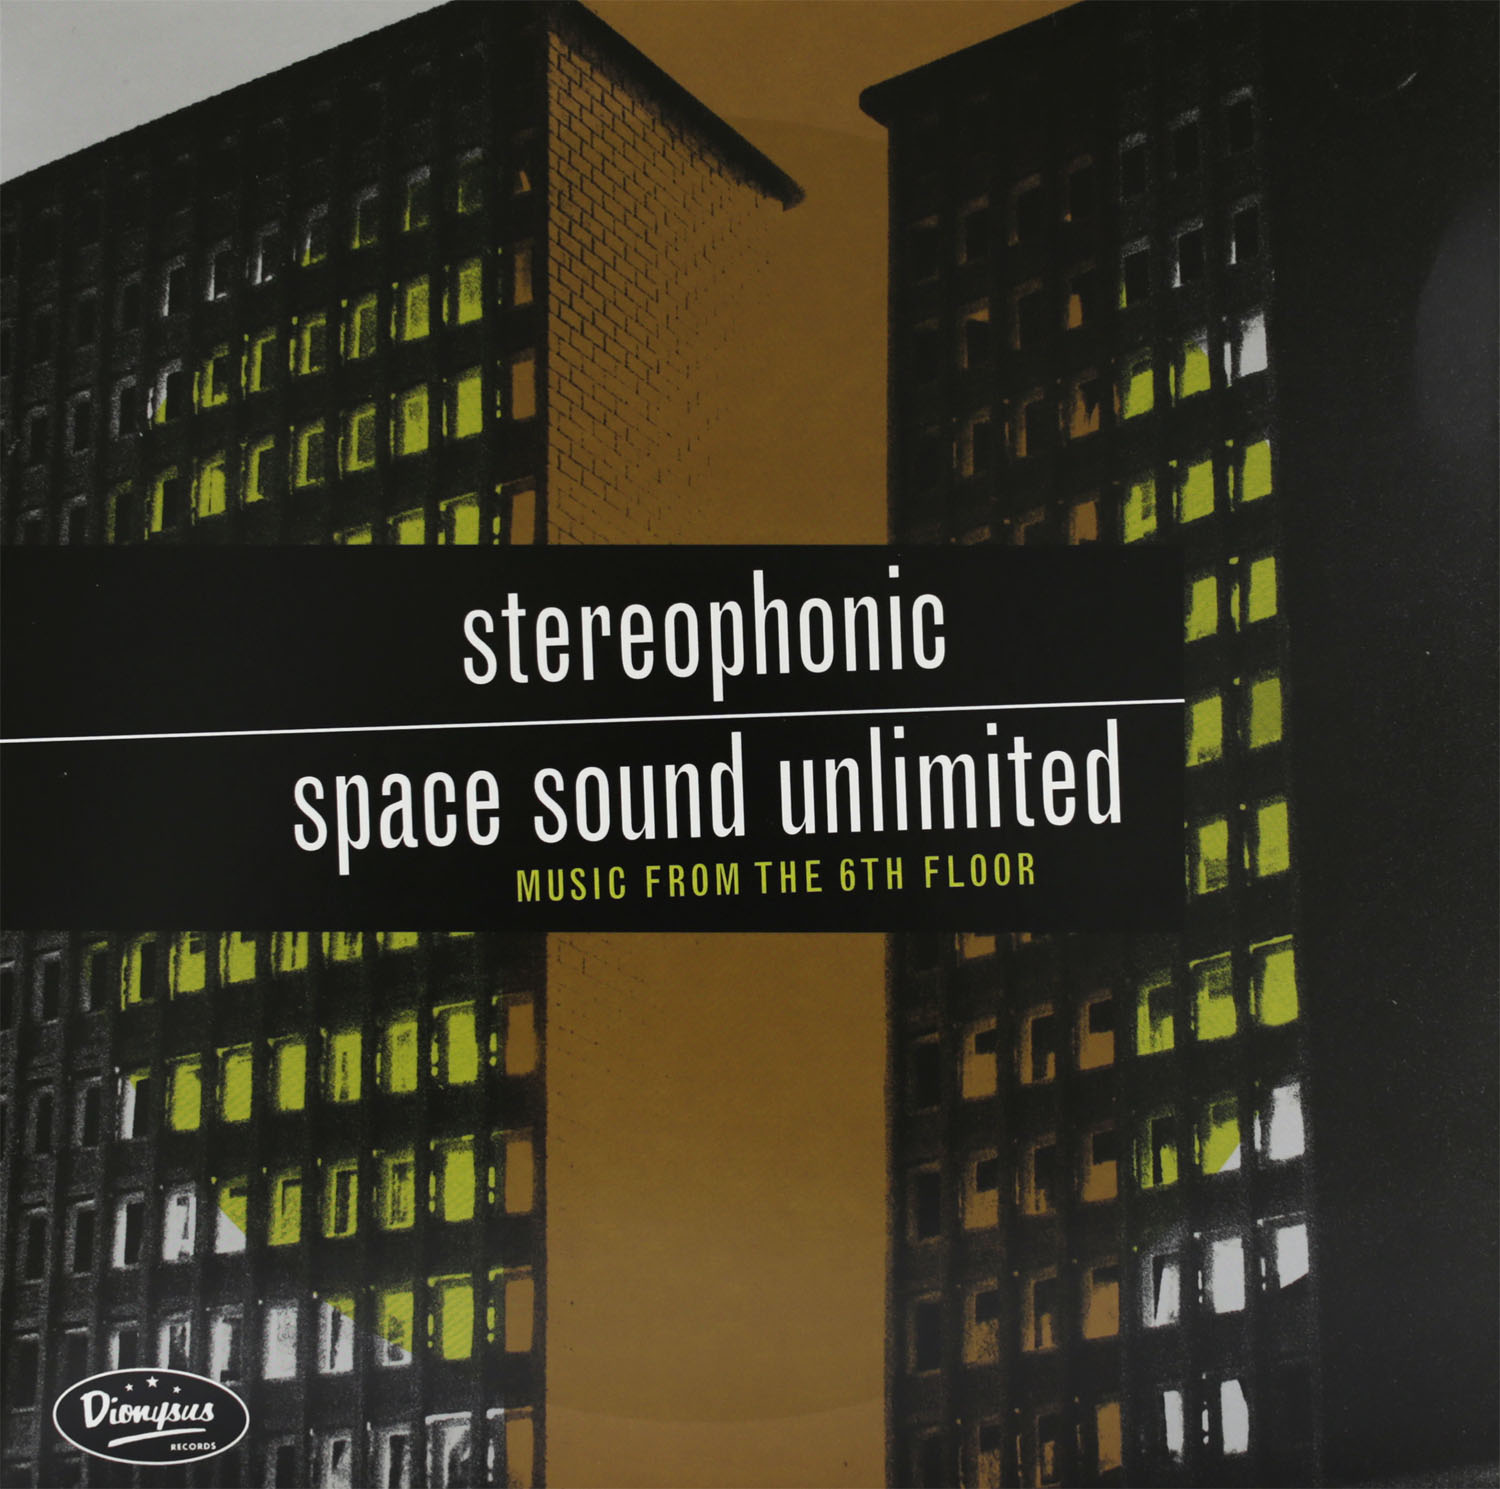  Stereophonic Space Sound Unlimited  Music from the 6th Floor 